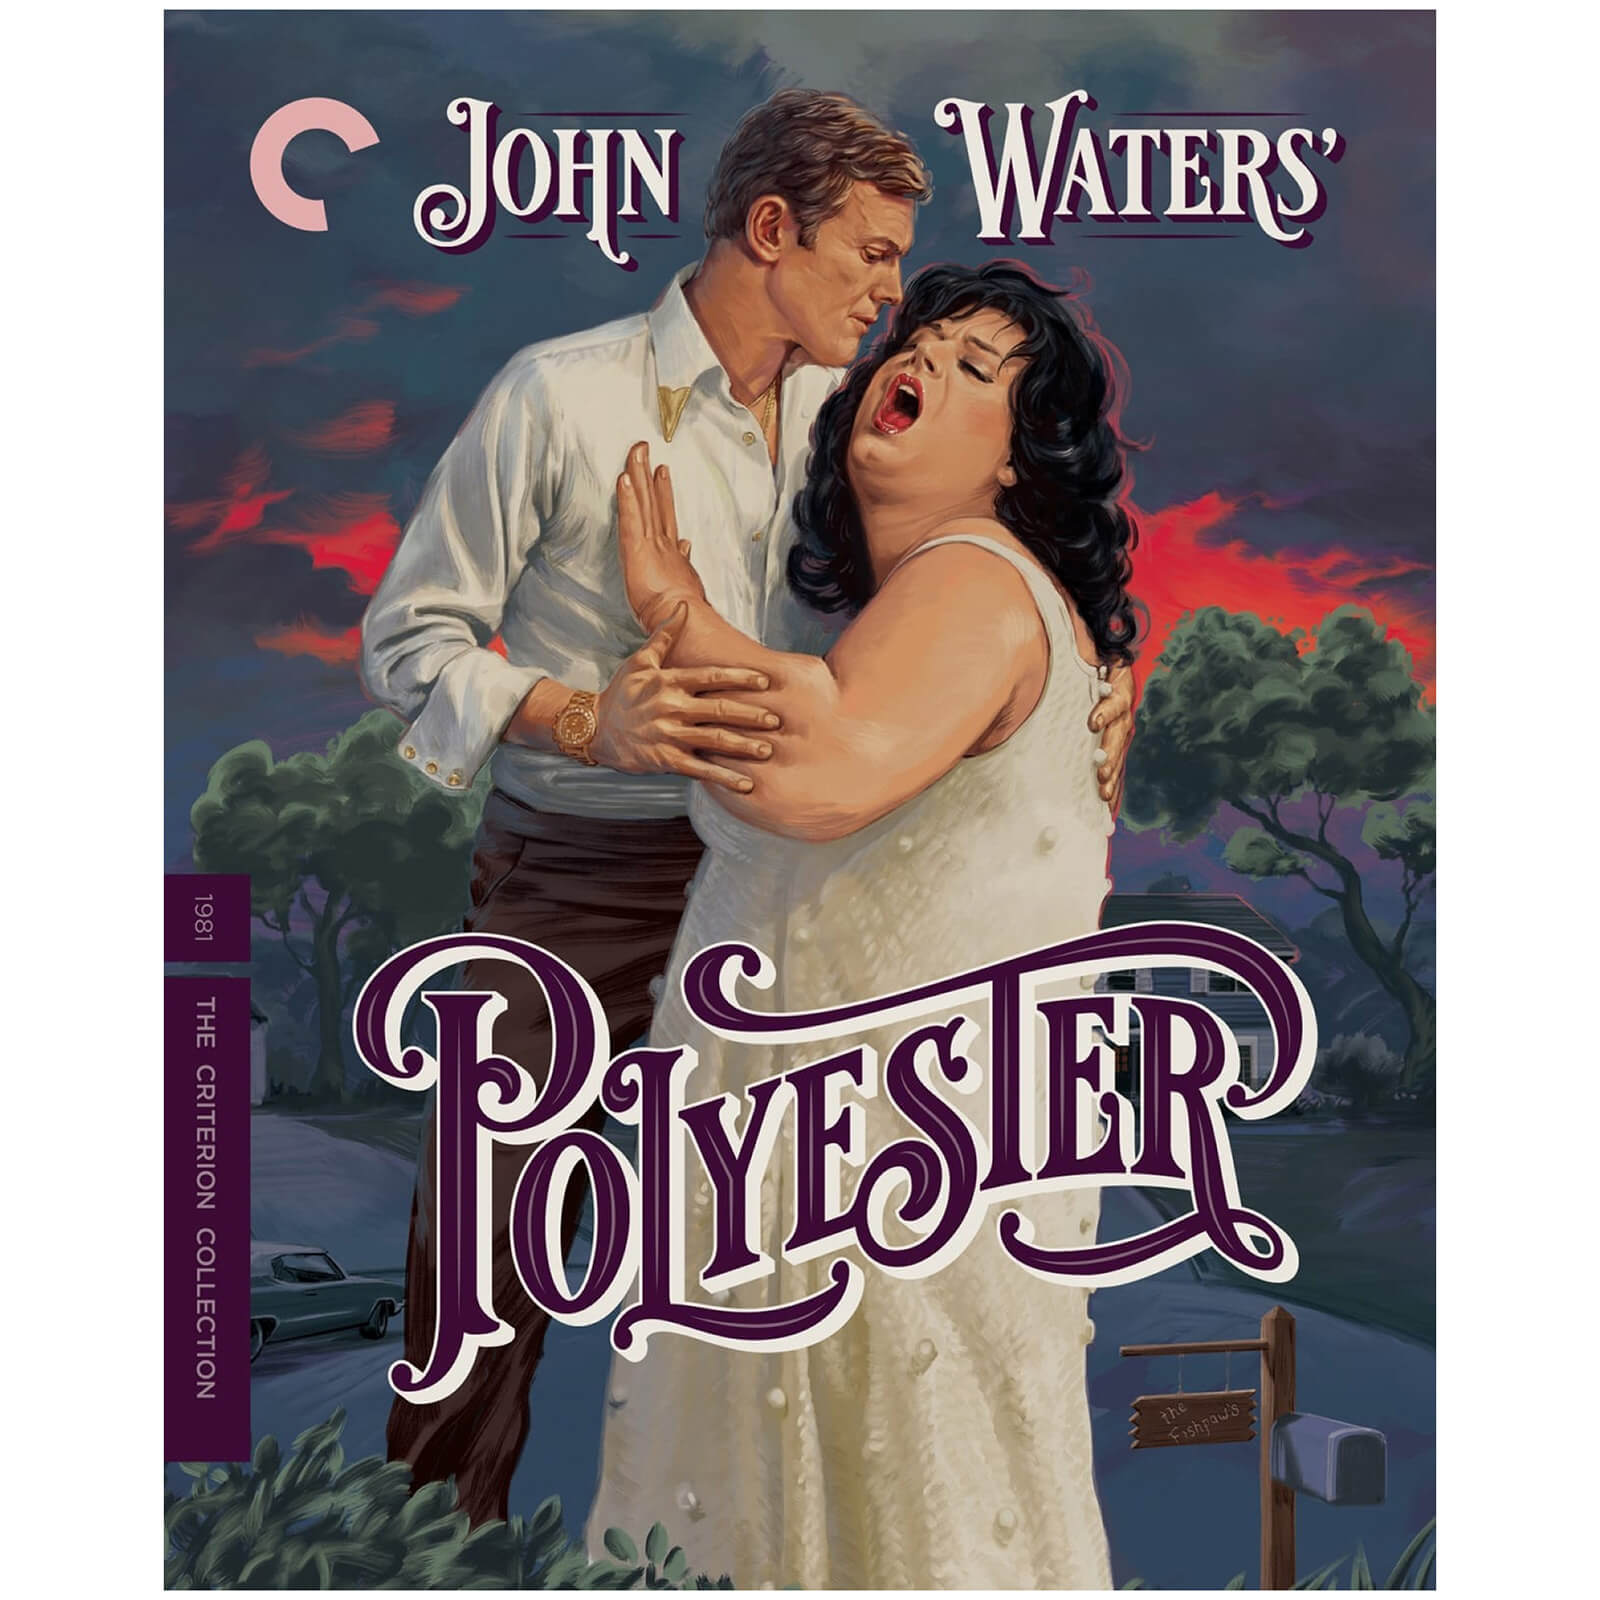 Polyester - The Criterion Collection (US Import)